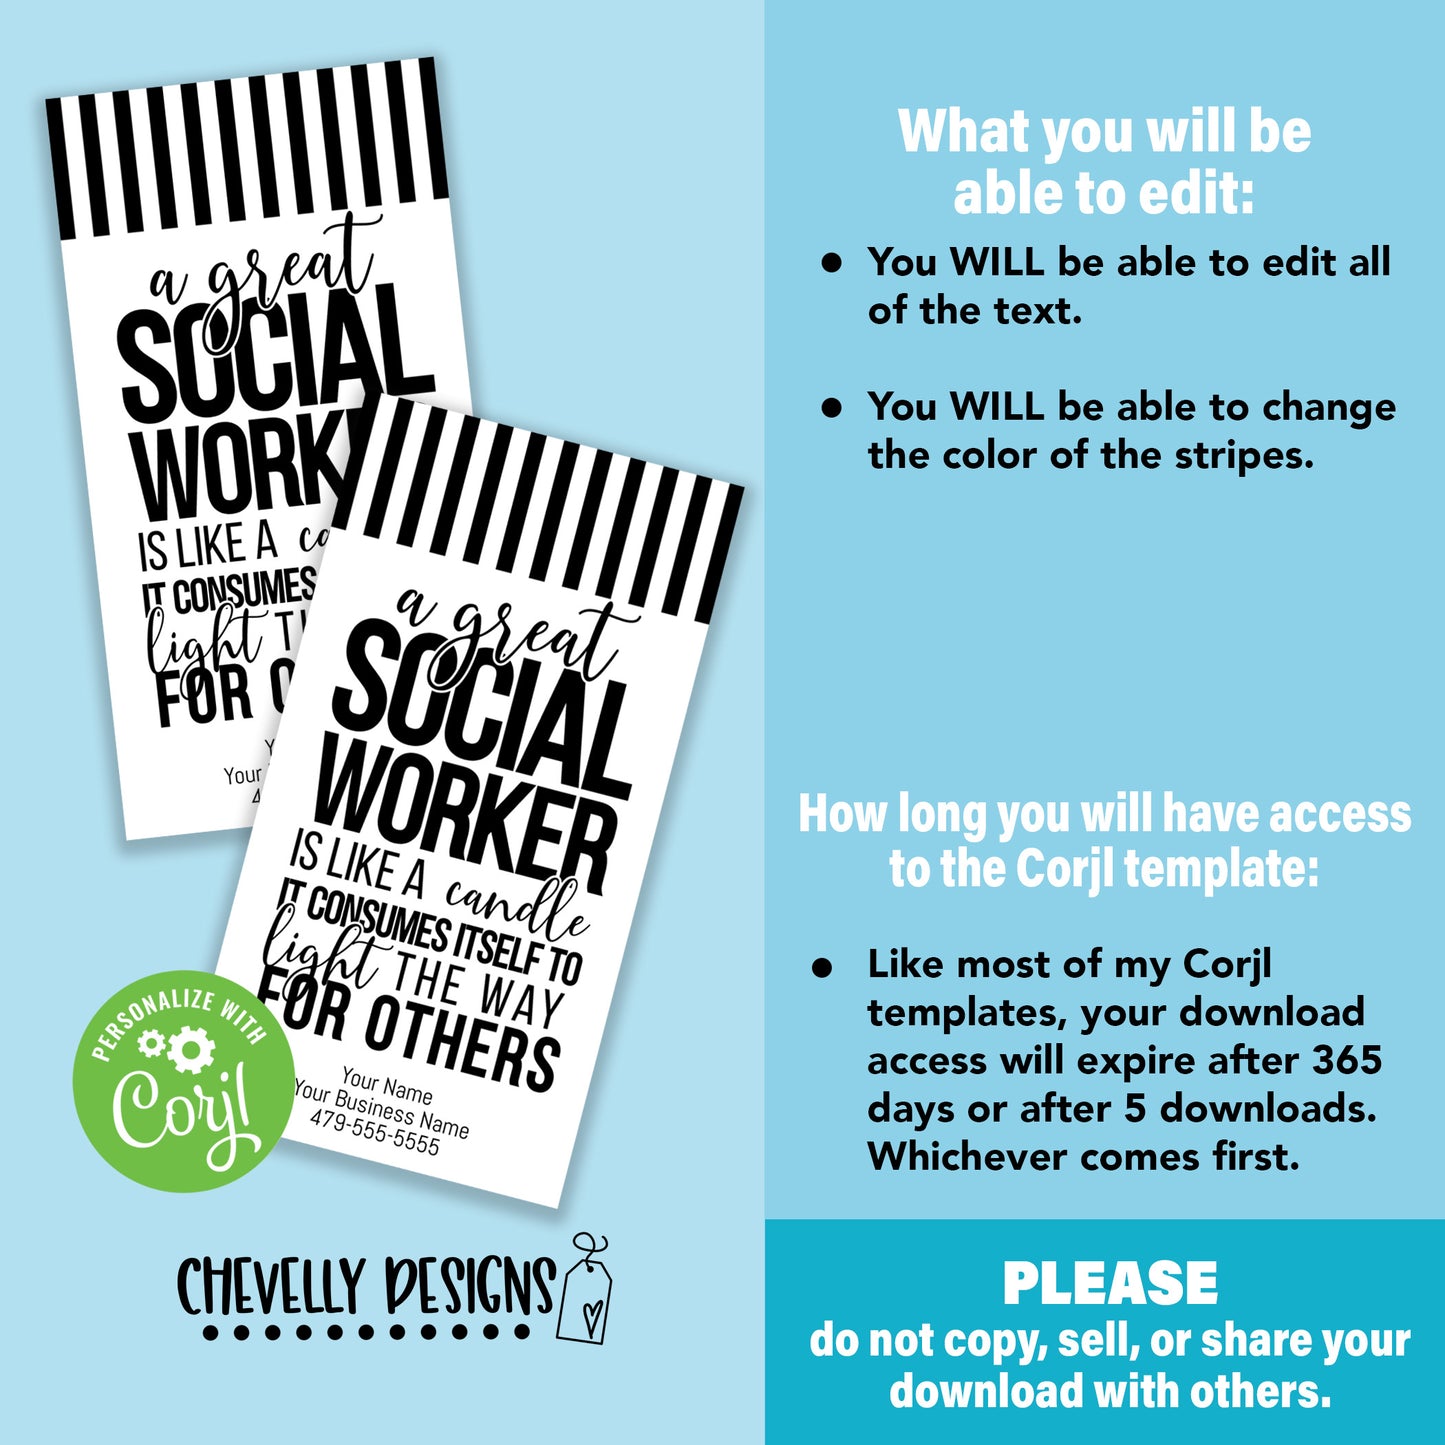 EDITABLE - A Great Social Worker - Appreciation Gift Tags - Printable - digital file